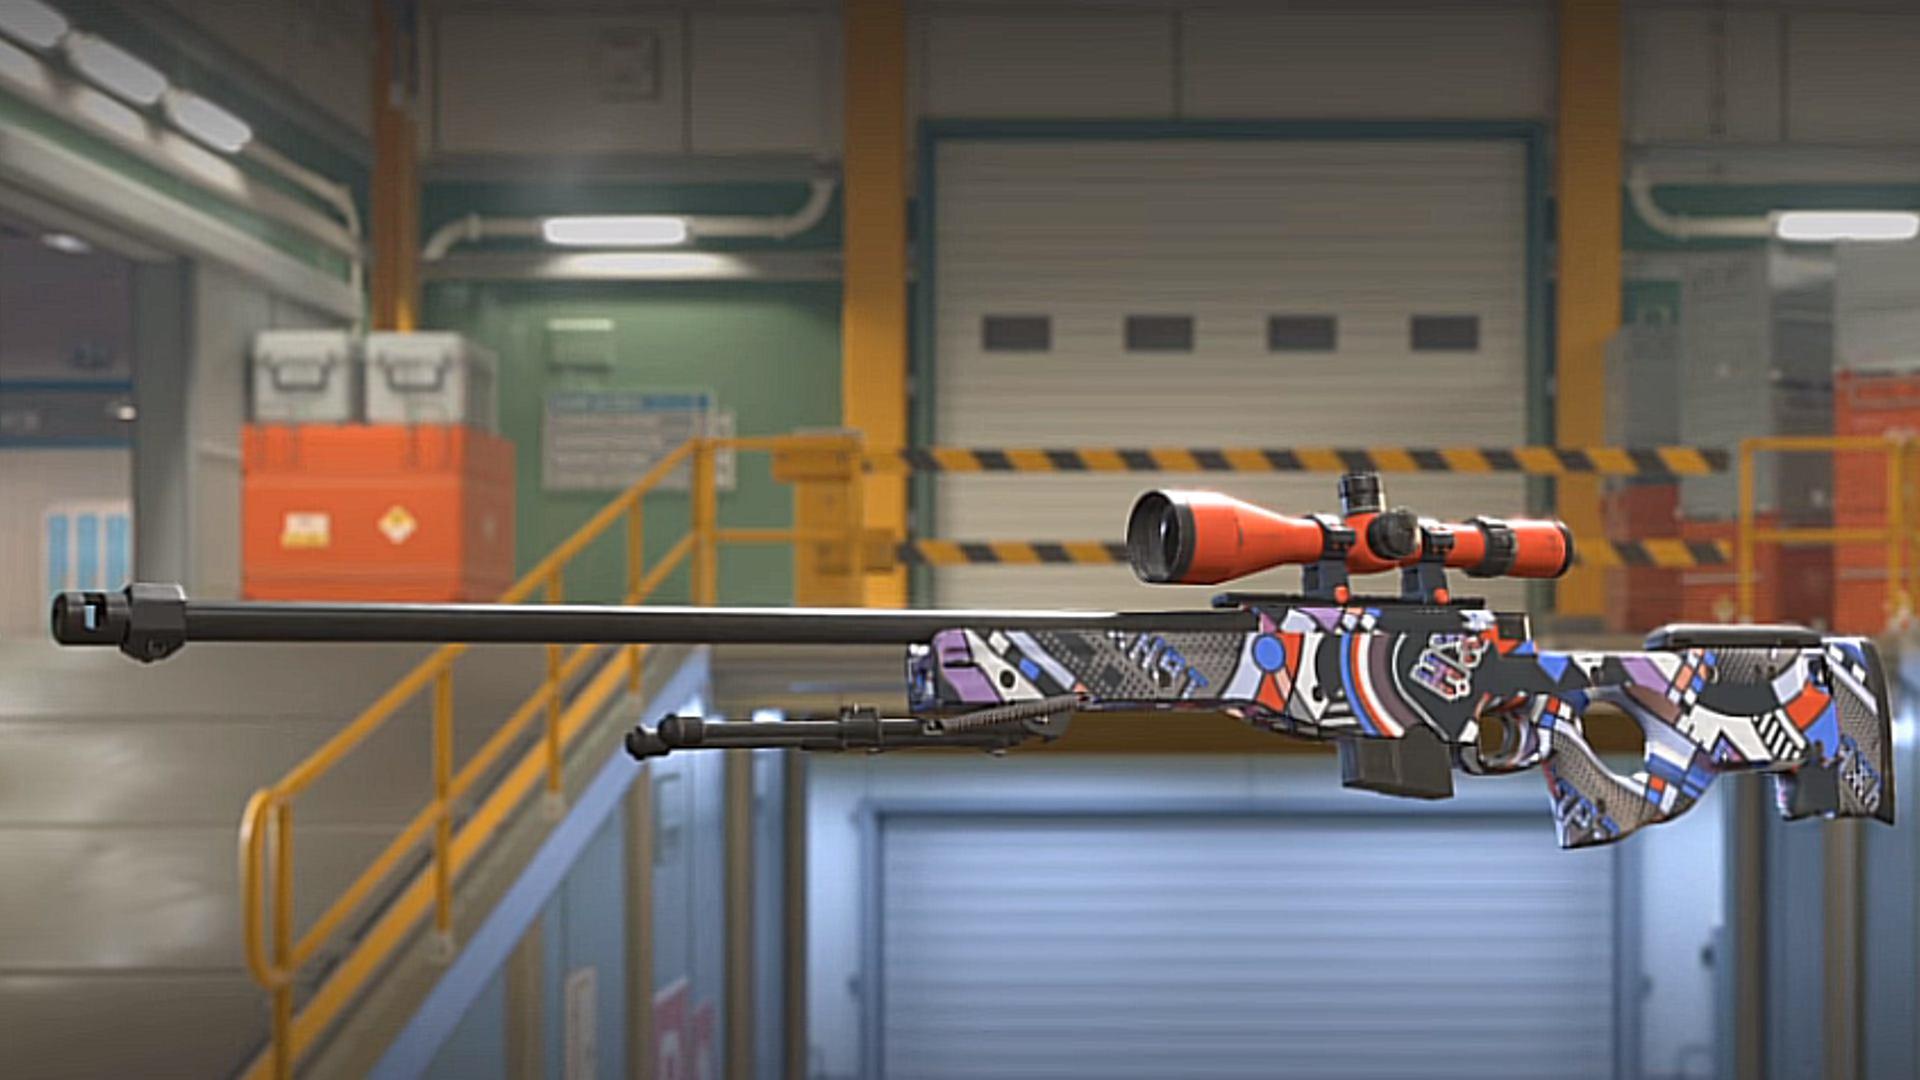 Will CS:GO skins & inventory carry over to Counter-Strike 2?